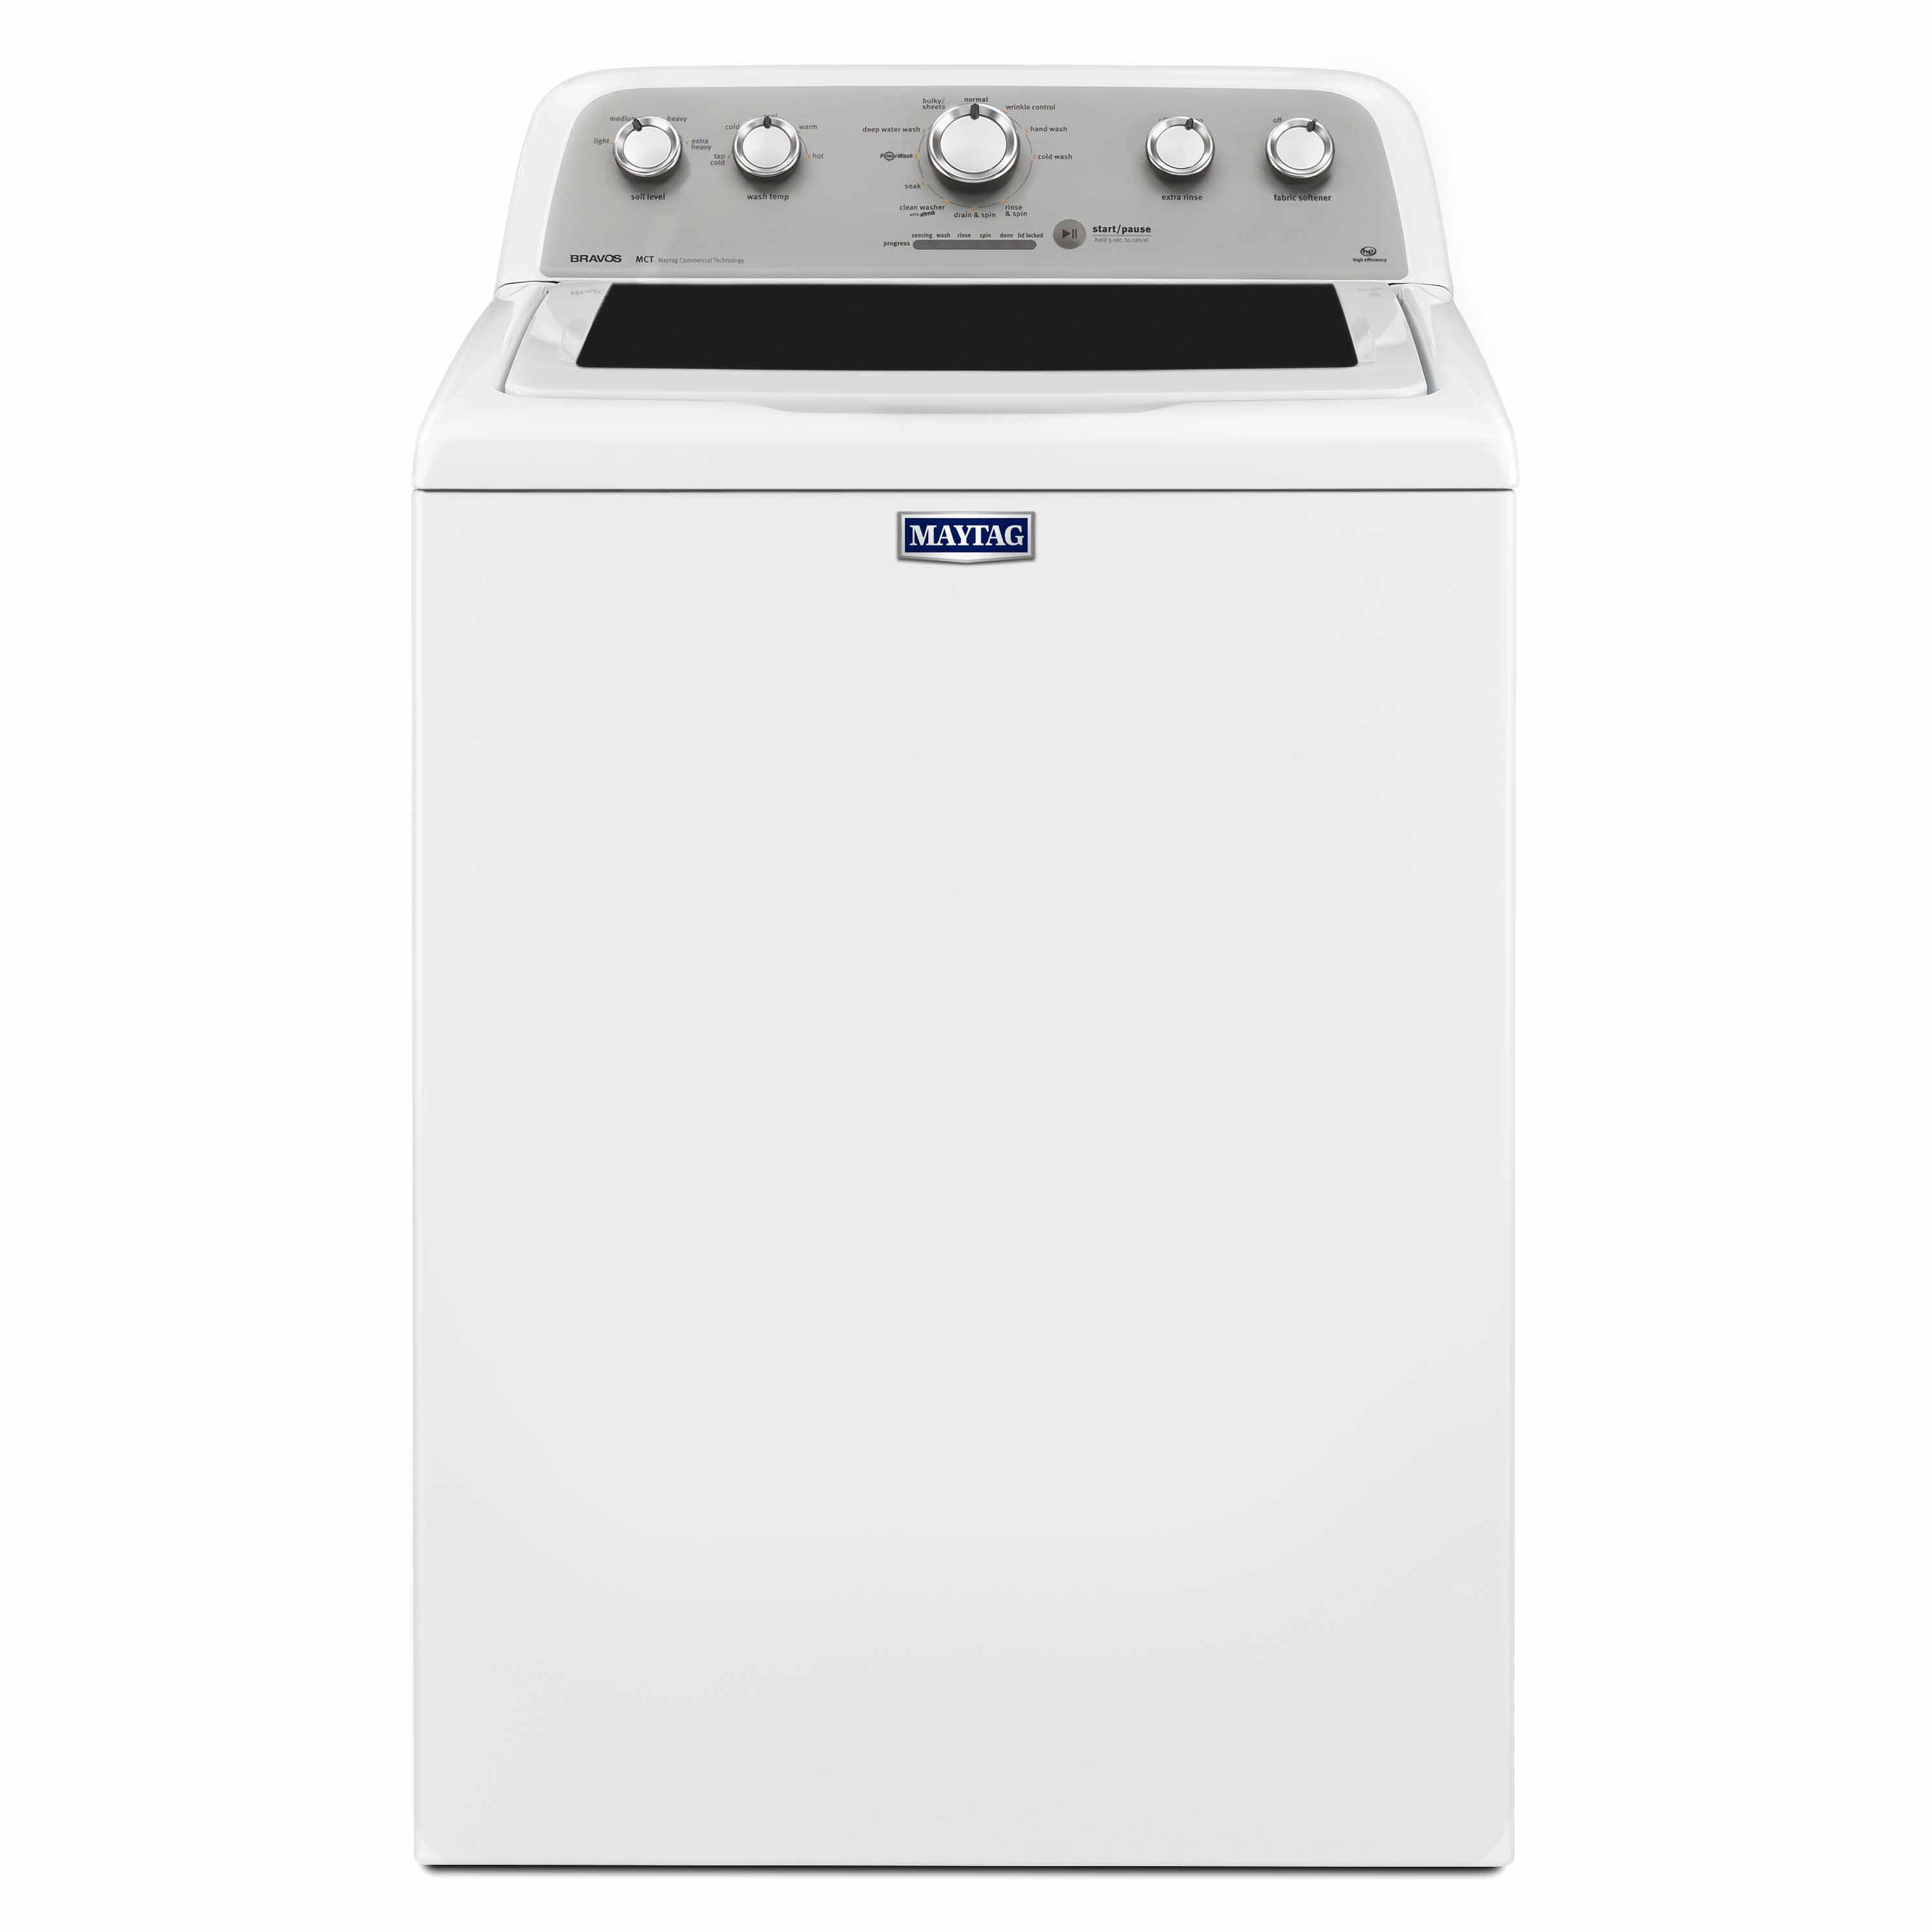 Do Maytag washers have varying capacities?